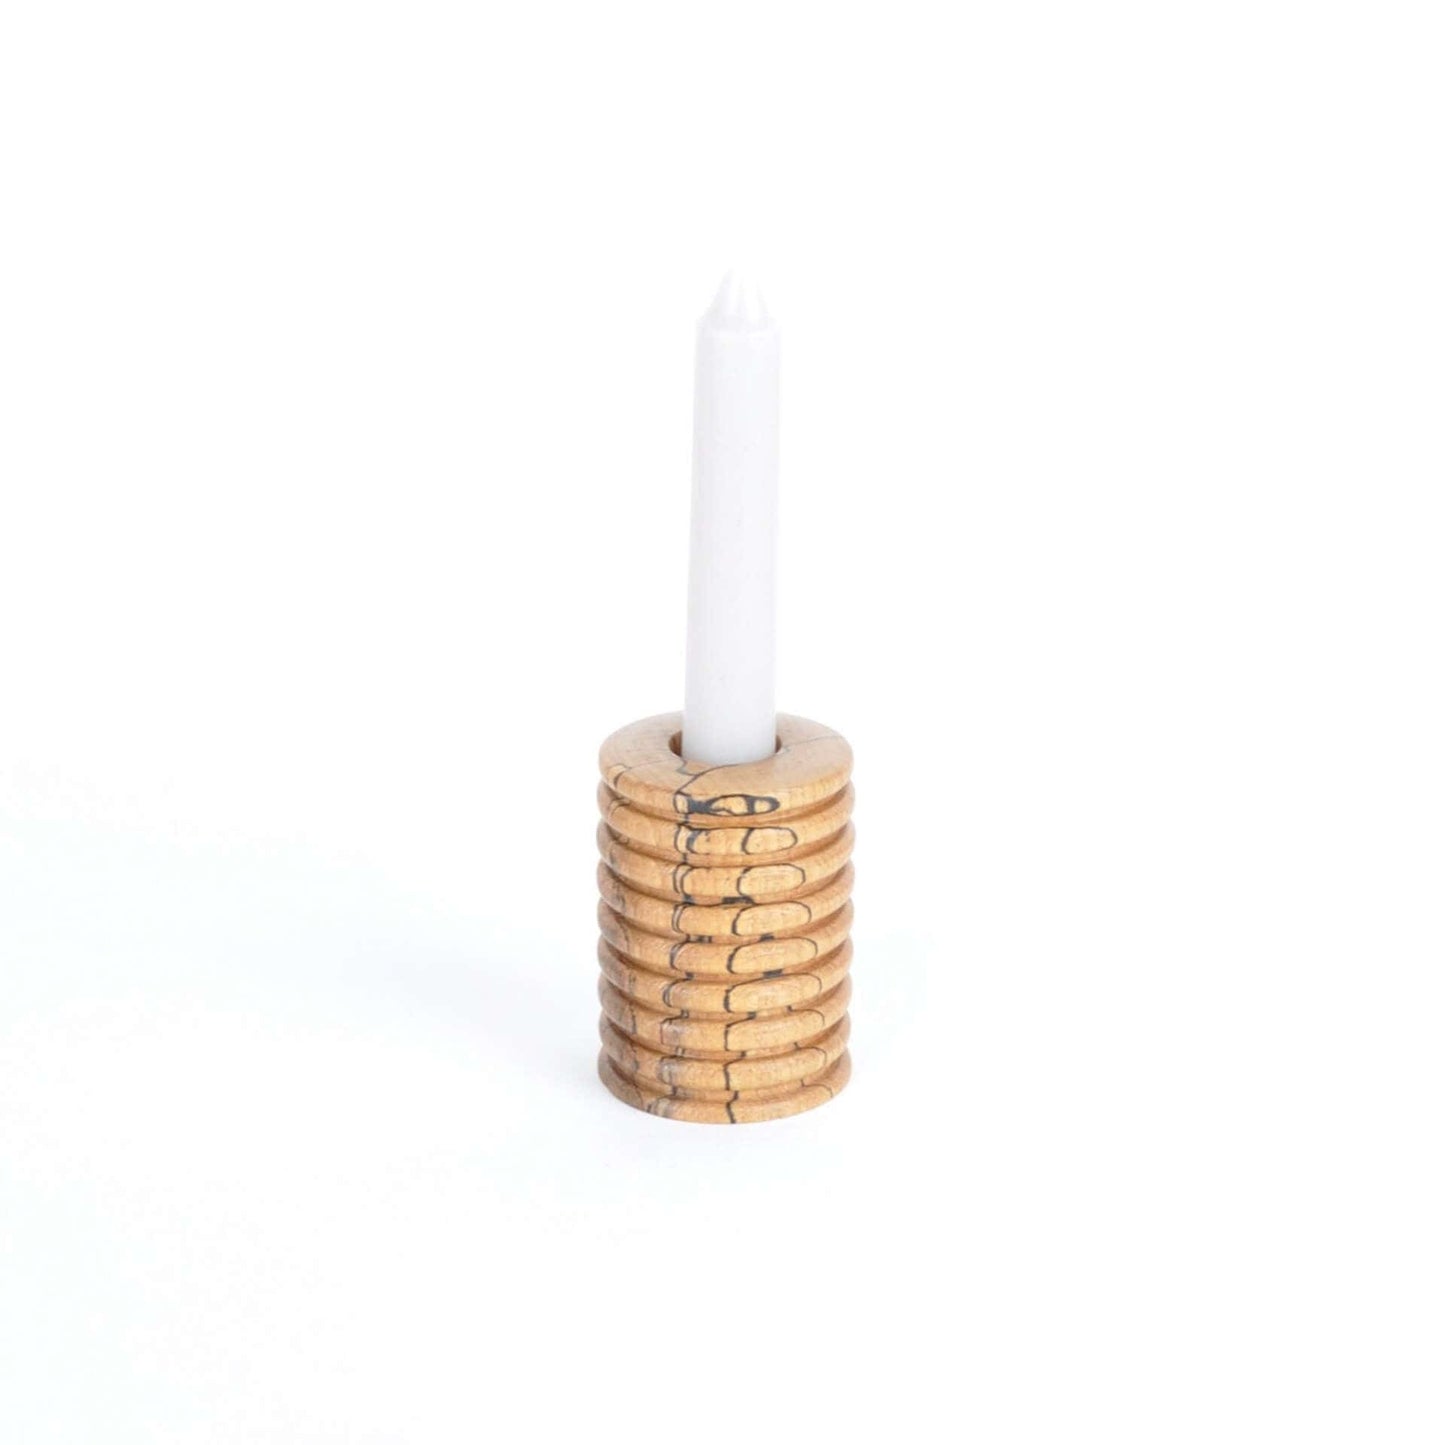 Something From The Turnery Candle Holder Tall b Wooden Candle Holders - Spalted Beech